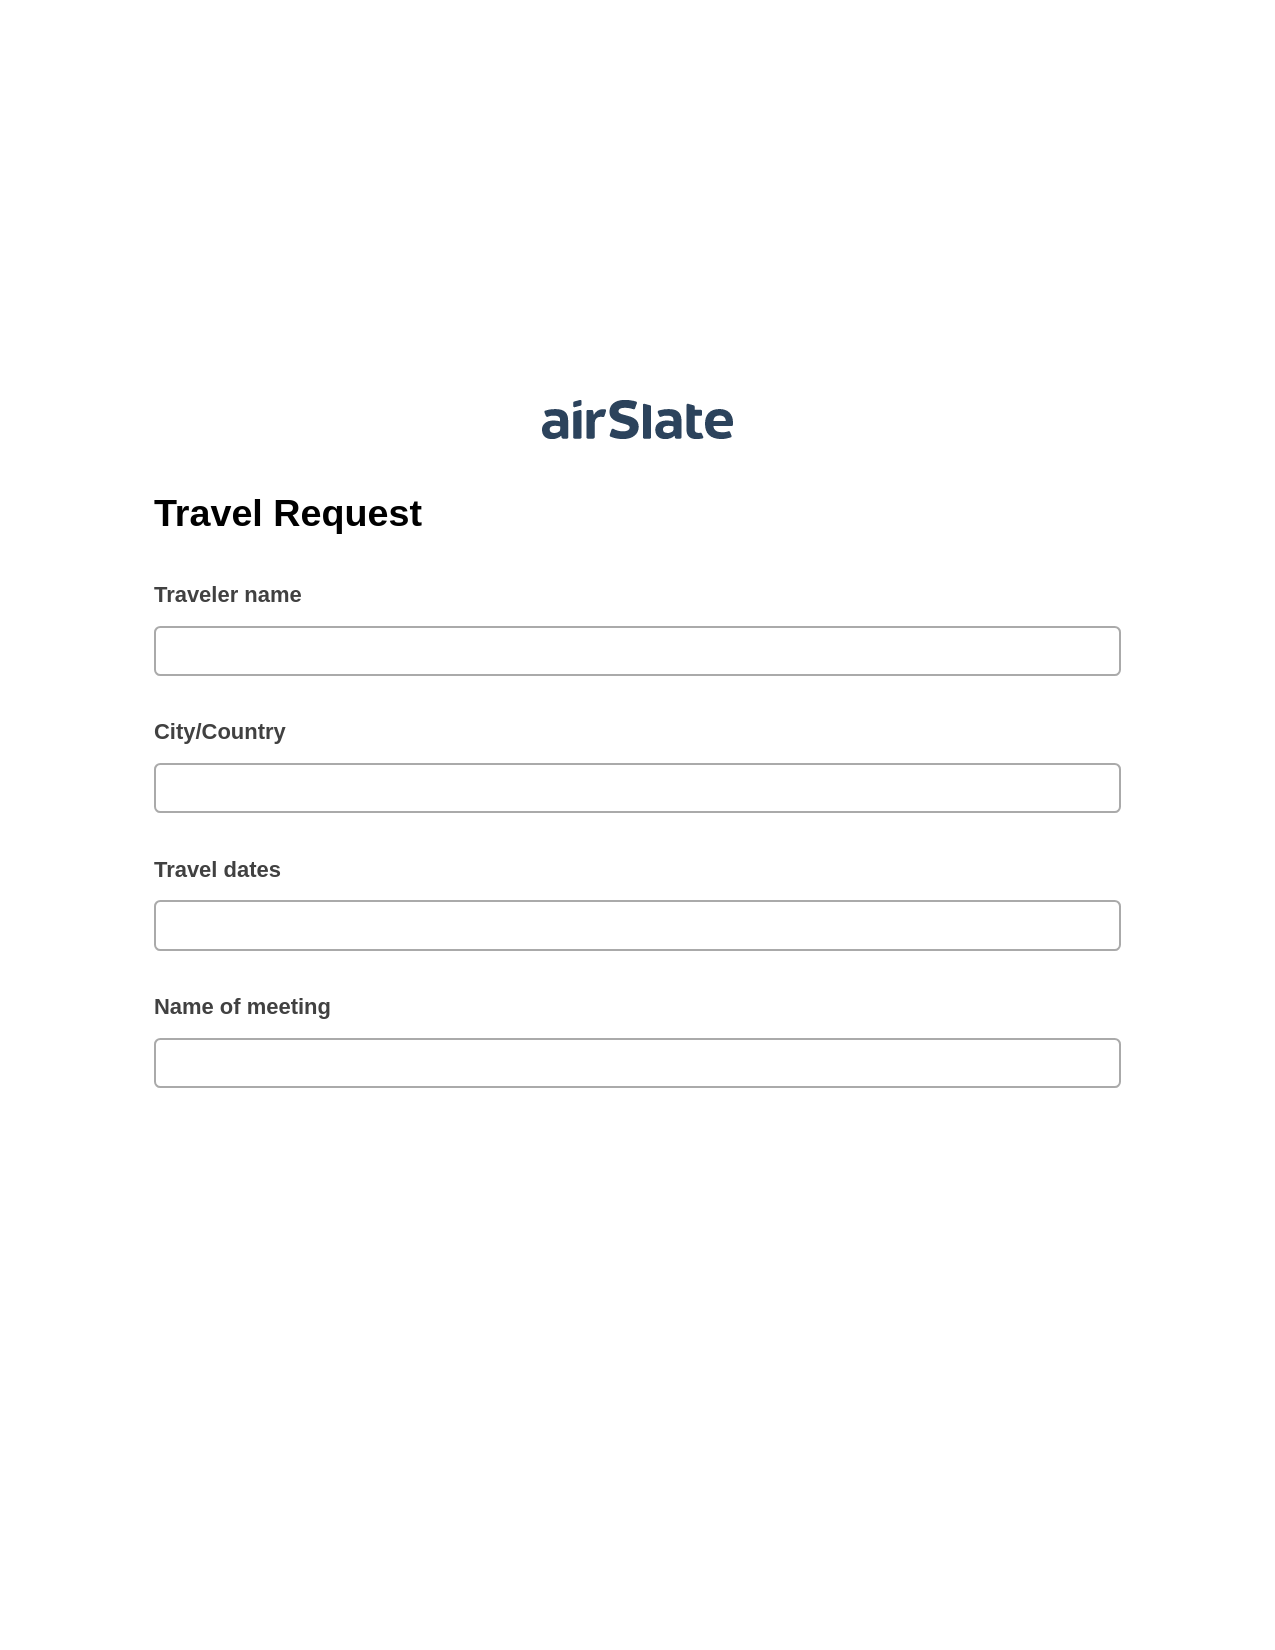 Travel Request Pre-fill from another Slate Bot, Create slate from another Flow Bot, Export to Smartsheet